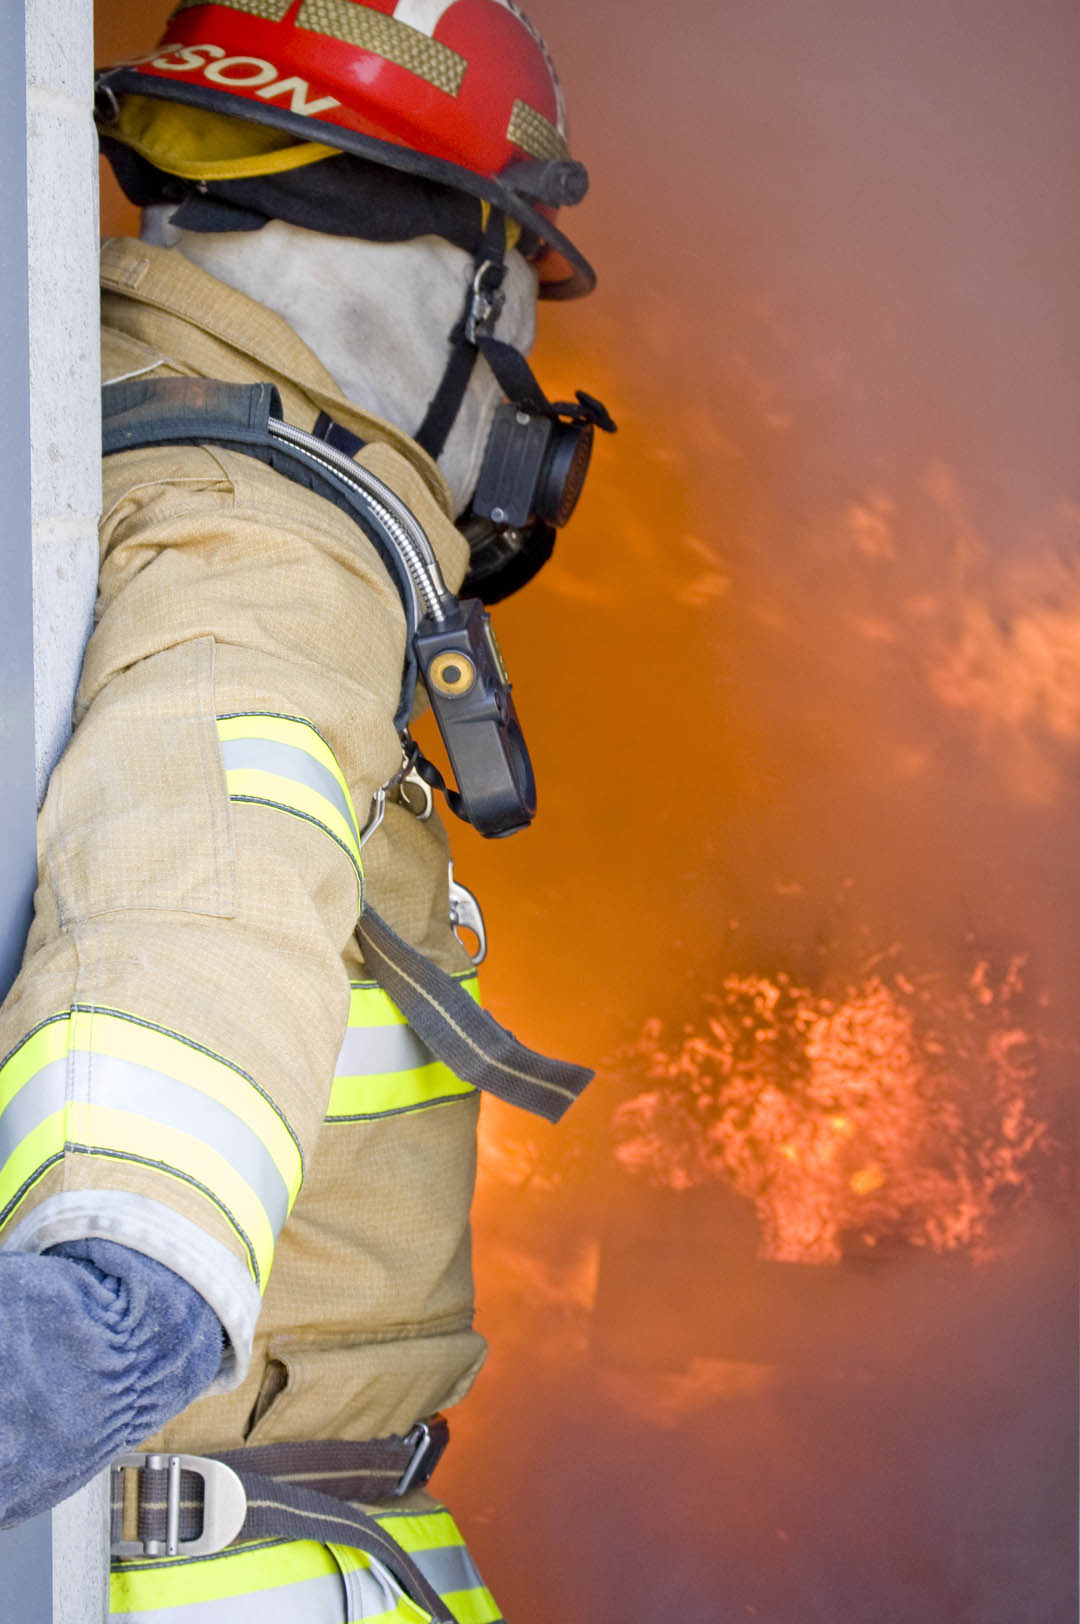 Read the full story, CCCC launches Firefighter Academy